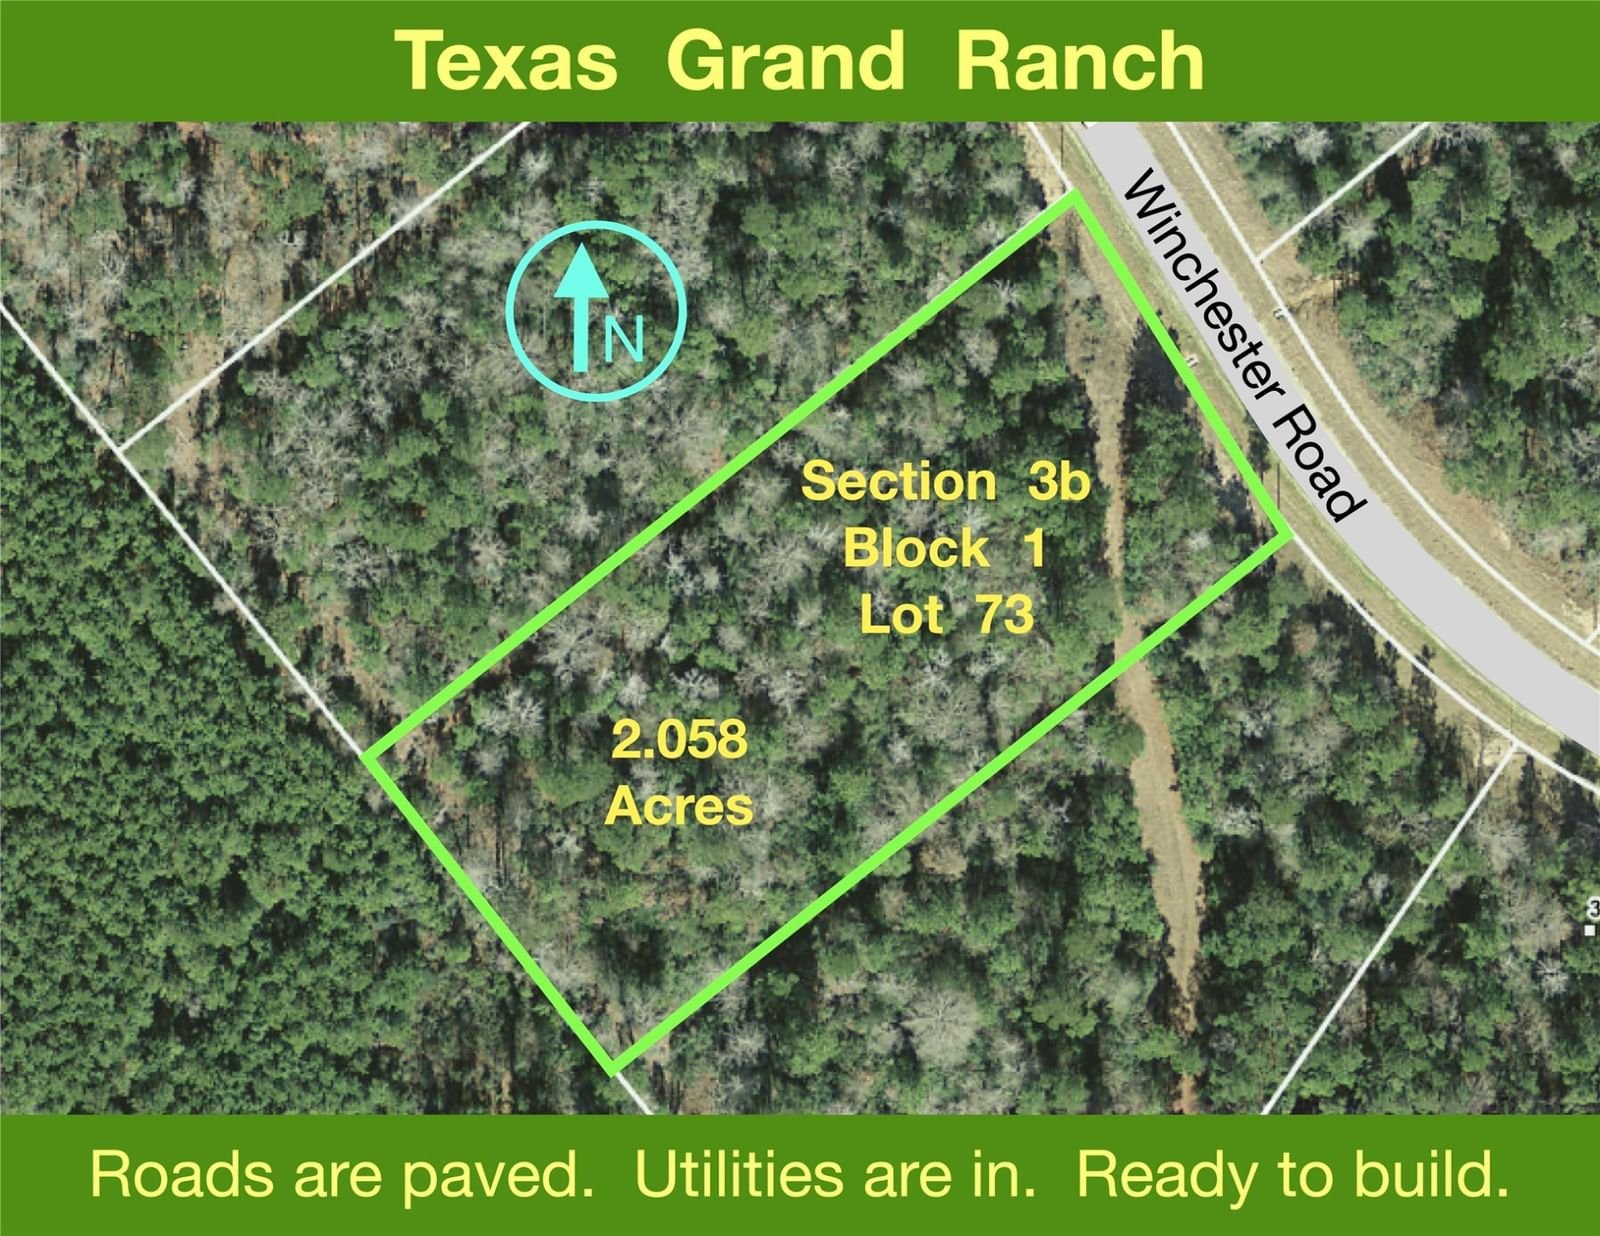 Real estate property located at 3b-1-73 Winchester, Walker, I Texas Grand Ranch, Huntsville, TX, US